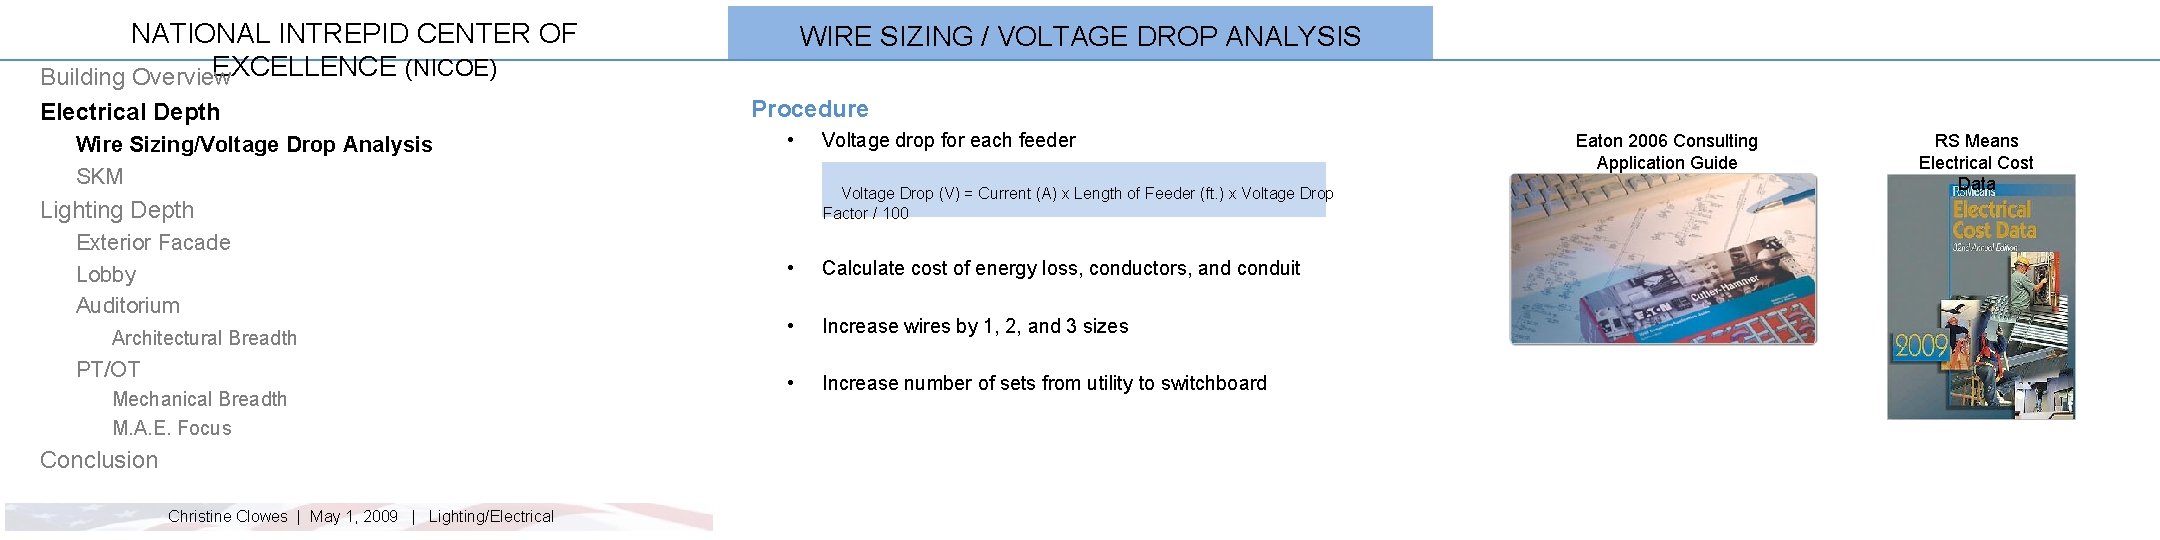 NATIONAL INTREPID CENTER OF EXCELLENCE (NICOE) Building Overview Electrical Depth Wire Sizing/Voltage Drop Analysis